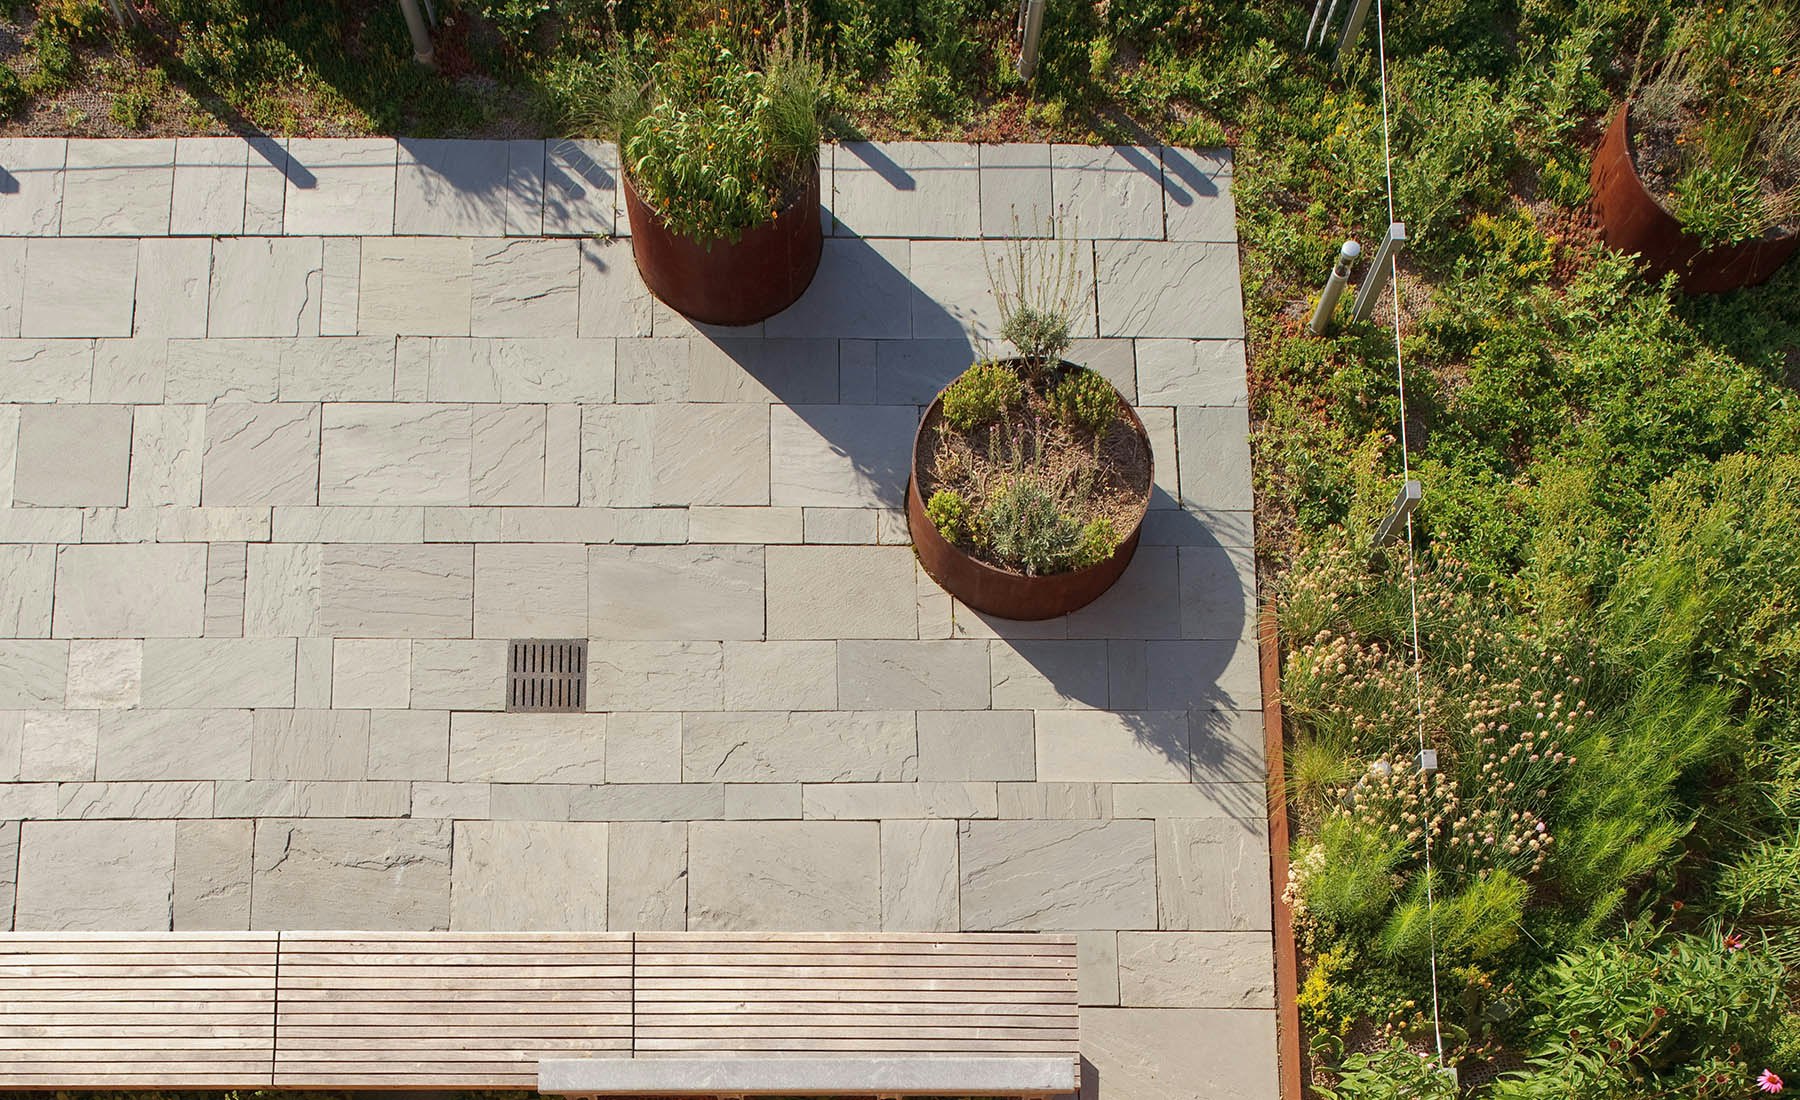 The green roof is conceived and designed as a demonstration of three distinct green roof planting strategies.